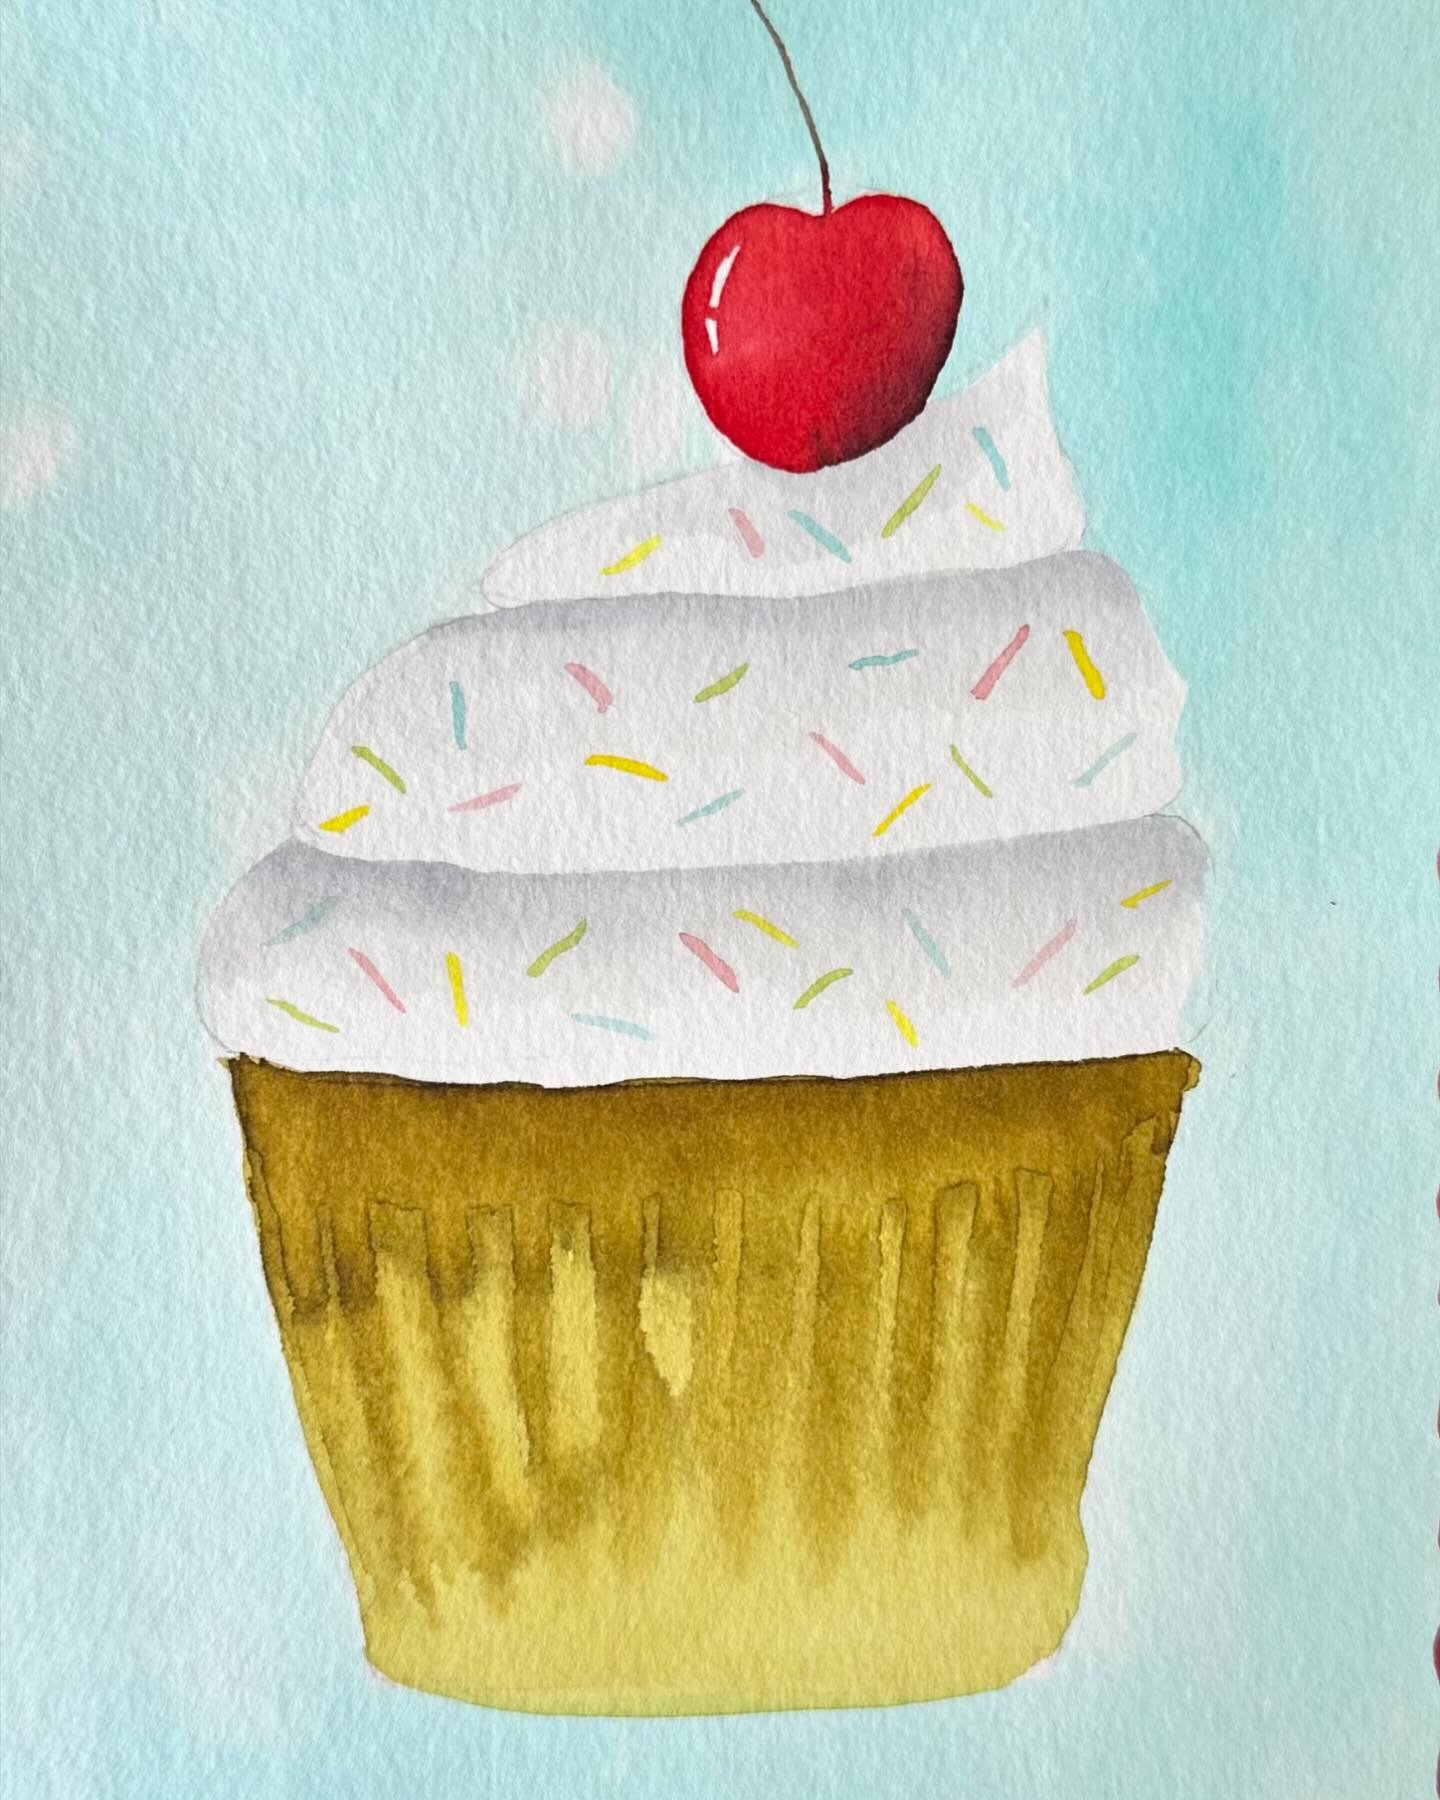 Had fun painting this little cupcake from a past live tutorial with @sarahdandelioncray. I like all the little sprinkles. I am a fan of sprinkles on cupcakes. 

#letsmakeartwatercolor #letsmakeart #watercolor #watercolorpainting